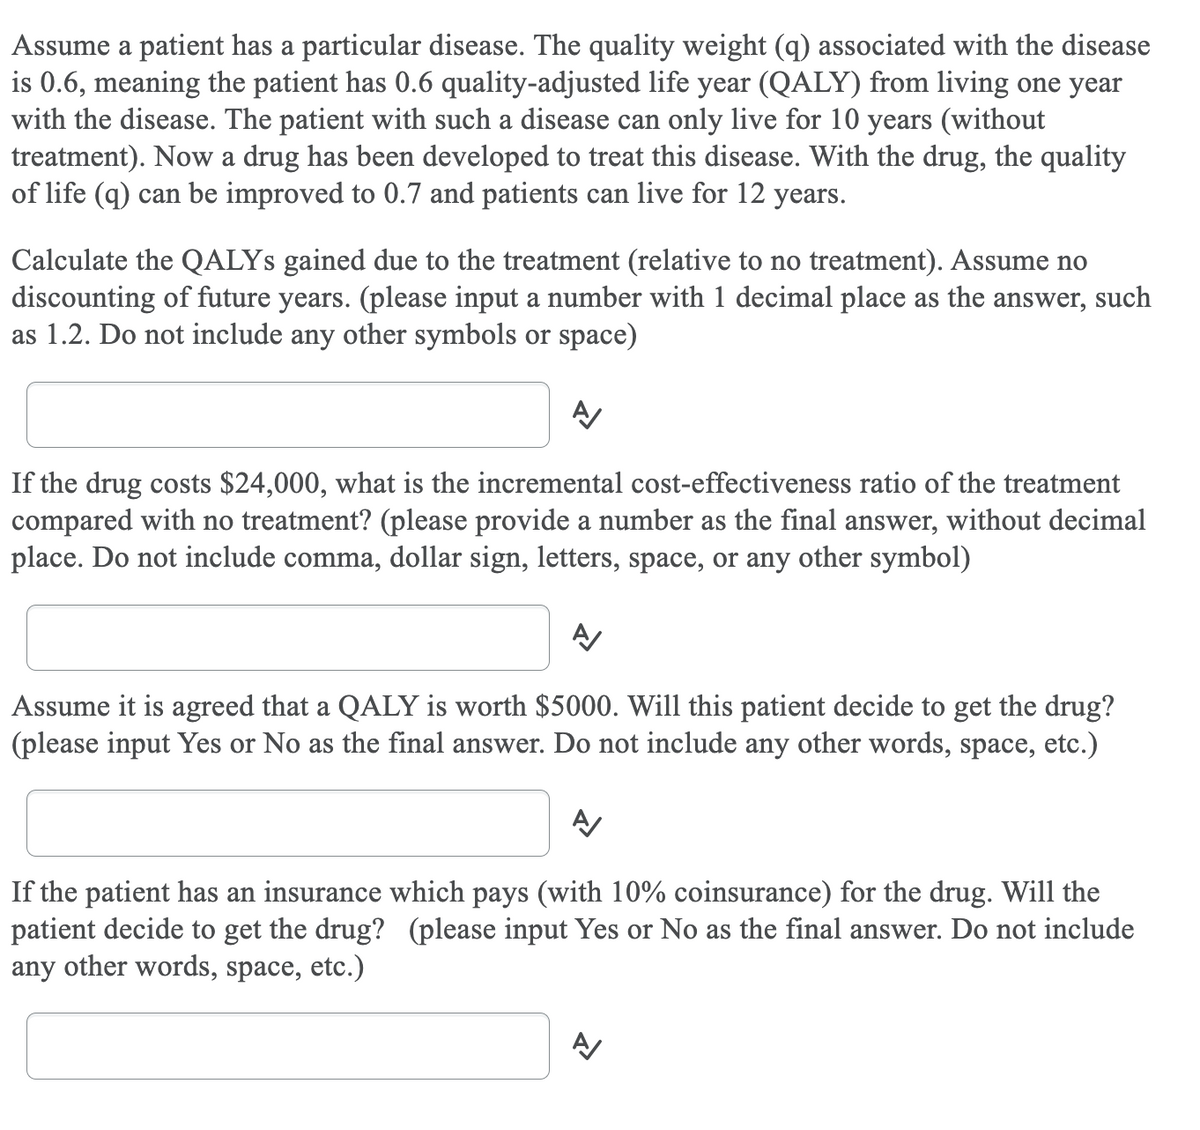 Assume a patient has a particular disease. The quality weight (q) associated with the disease
is 0.6, meaning the patient has 0.6 quality-adjusted life year (QALY) from living one year
with the disease. The patient with such a disease can only live for 10 years (without
treatment). Now a drug has been developed to treat this disease. With the drug, the quality
of life (q) can be improved to 0.7 and patients can live for 12 years.
Calculate the QALYS gained due to the treatment (relative to no treatment). Assume no
discounting of future years. (please input a number with 1 decimal place as the answer, such
as 1.2. Do not include any other symbols or space)
If the drug costs $24,000, what is the incremental cost-effectiveness ratio of the treatment
compared with no treatment? (please provide a number as the final answer, without decimal
place. Do not include comma, dollar sign, letters, space, or any other symbol)
Assume it is agreed that a QALY is worth $5000. Will this patient decide to get the drug?
(please input Yes or No as the final answer. Do not include any other words, space, etc.)
If the patient has an insurance which pays (with 10% coinsurance) for the drug. Will the
patient decide to get the drug? (please input Yes or No as the final answer. Do not include
any other words, space, etc.)
